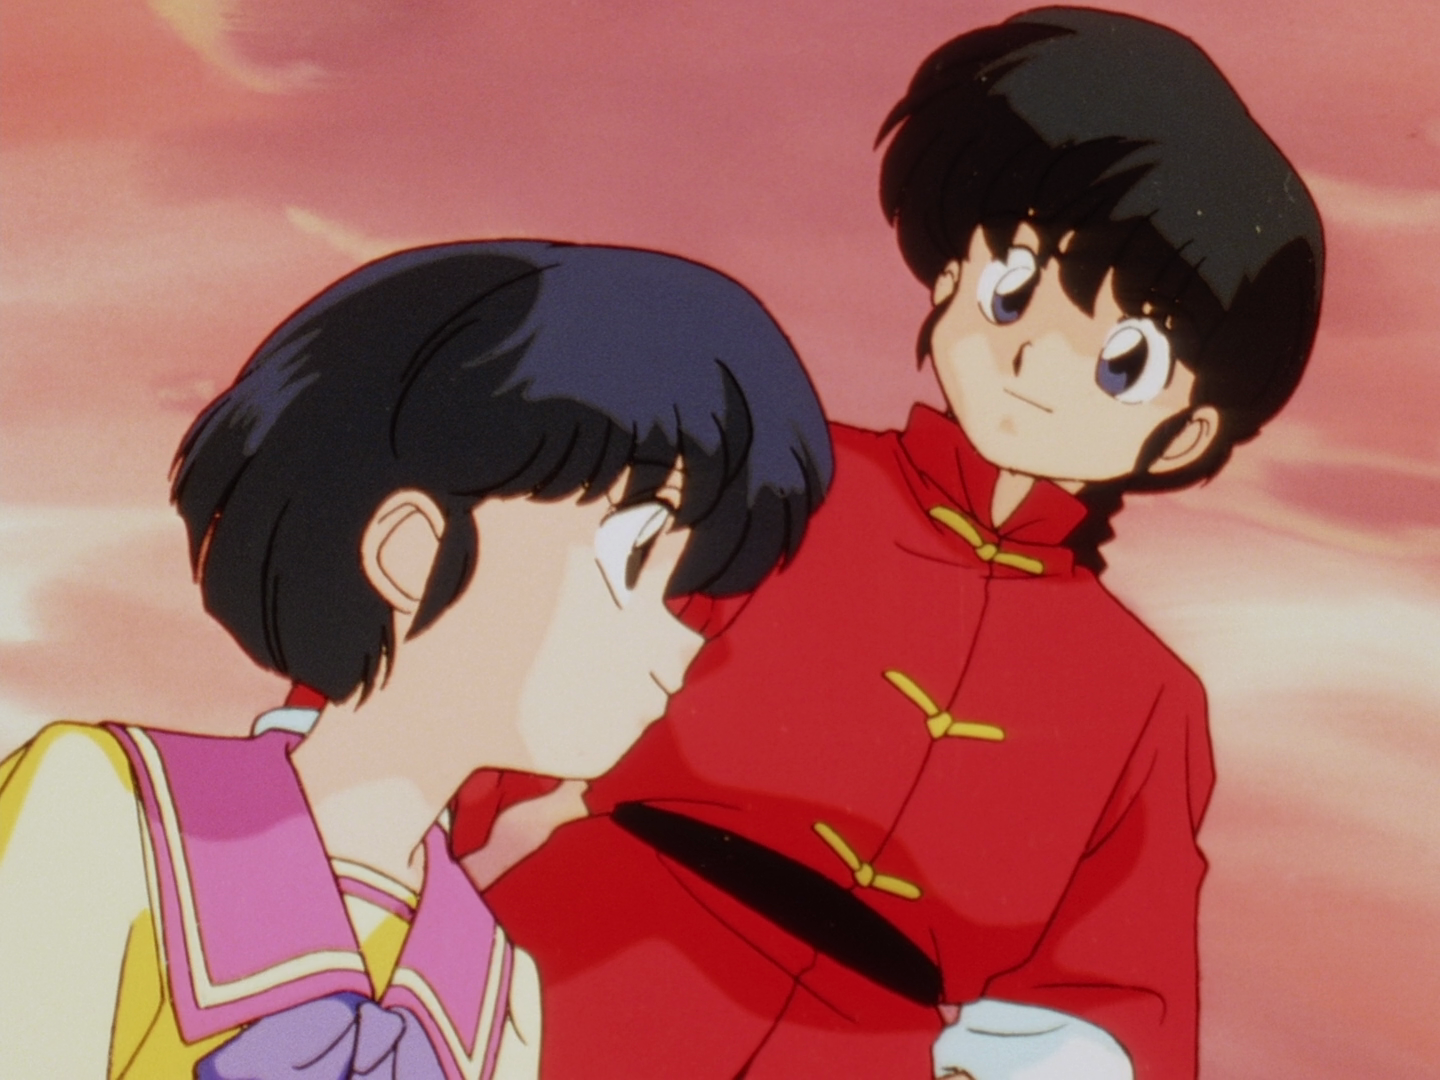 चित्र of ♡ Ranma and Akane, ら ん ま 1 2 乱 馬 と あ か ね ♡ (乱 あ) for प्रशंसकों of ...